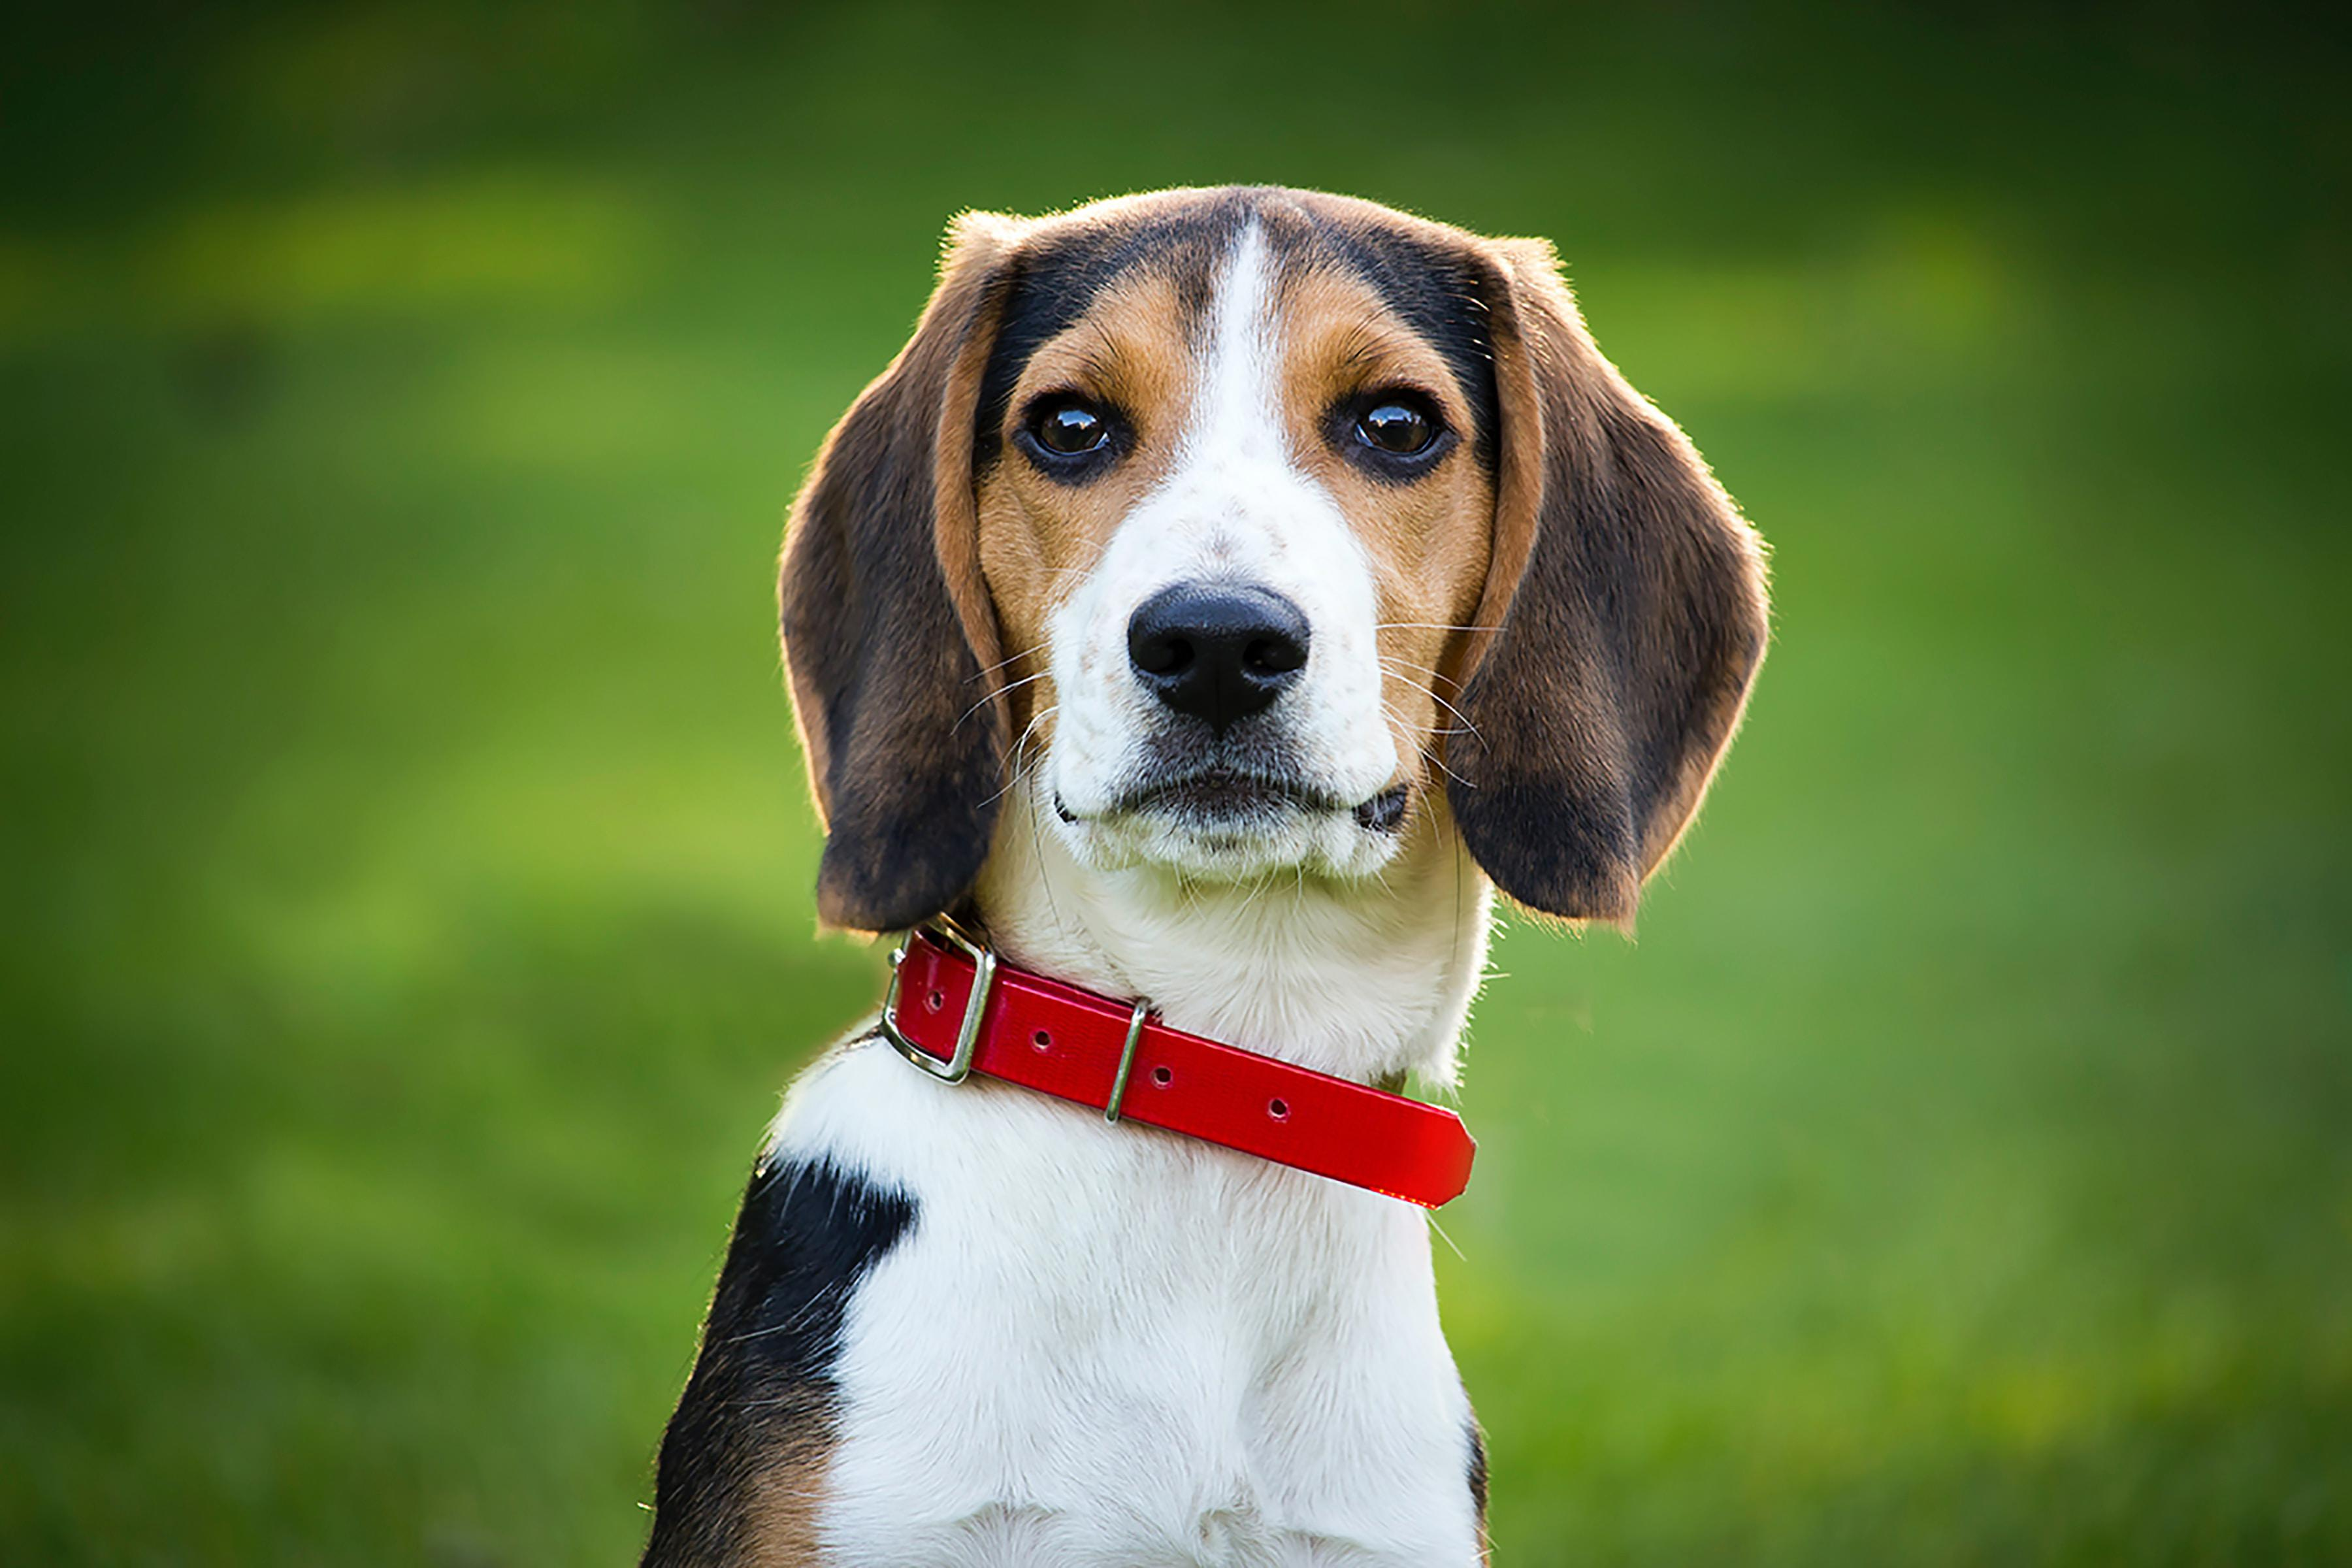 Are Beagles Natural Hunting Dogs? An Overview of the Breed's Hunting History